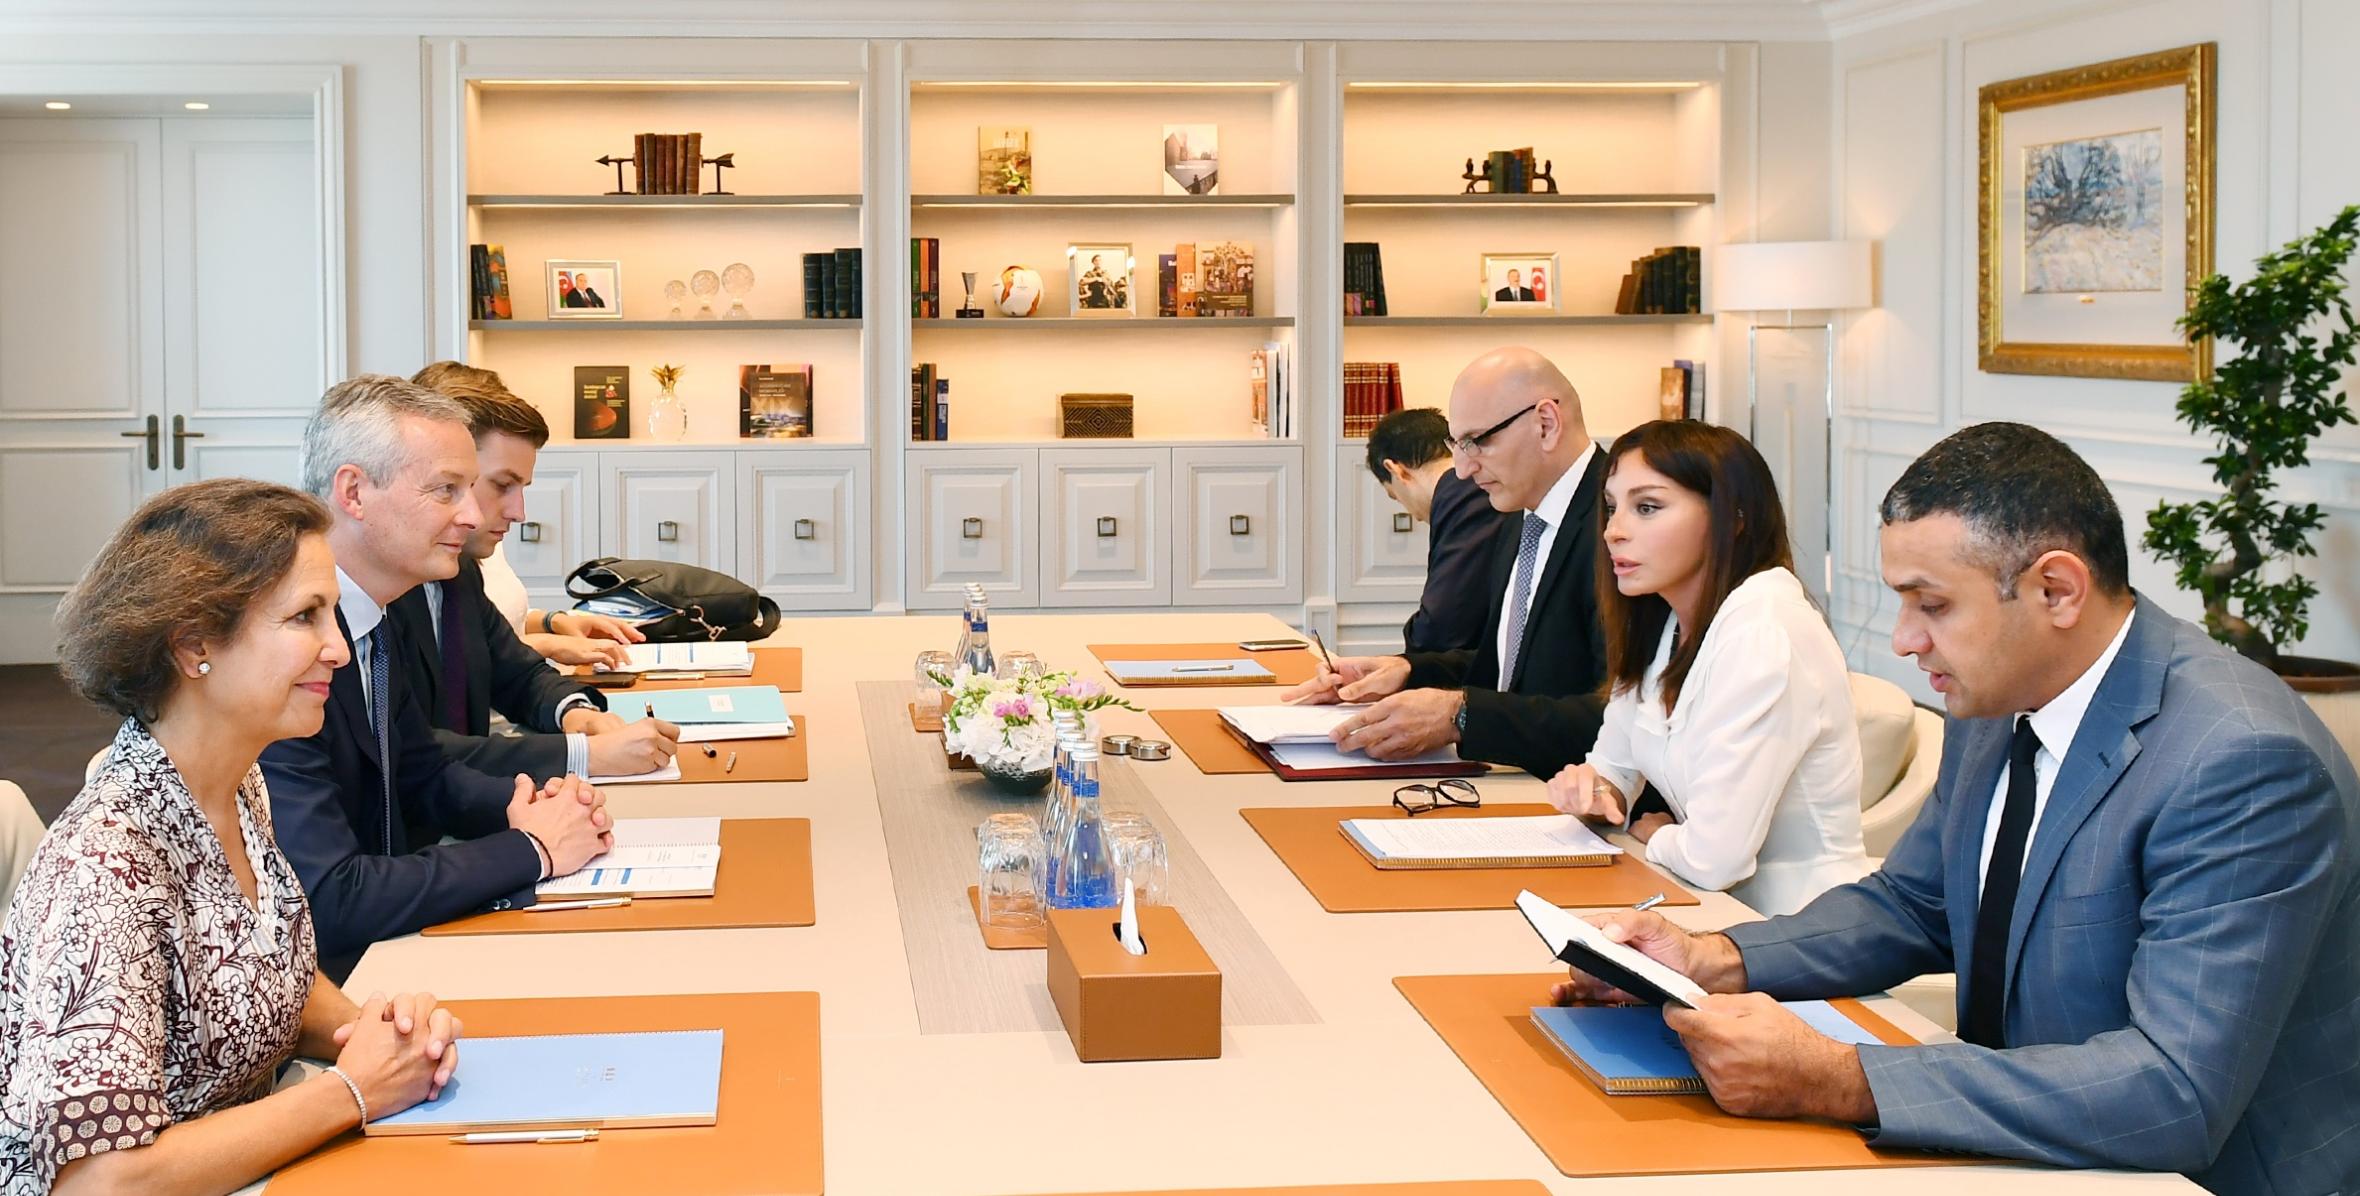 First Vice-President of Azerbaijan Mehriban Aliyeva met with French Minister of Economy and Finance